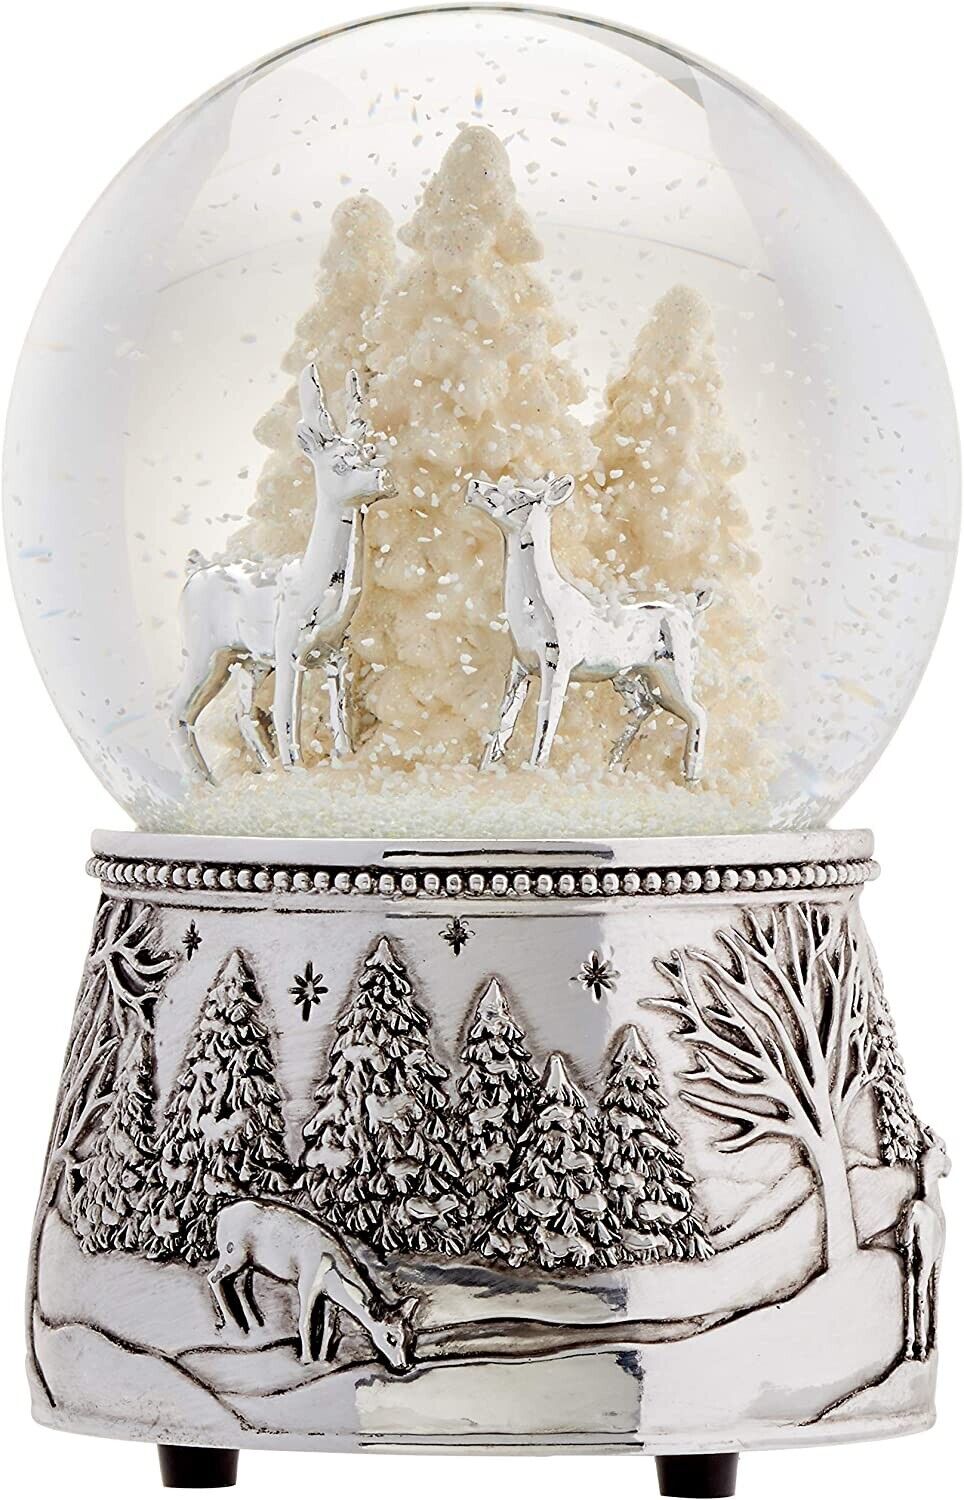 Reed and Barton North Pole Bound Christmas Snowglobe 867074 New